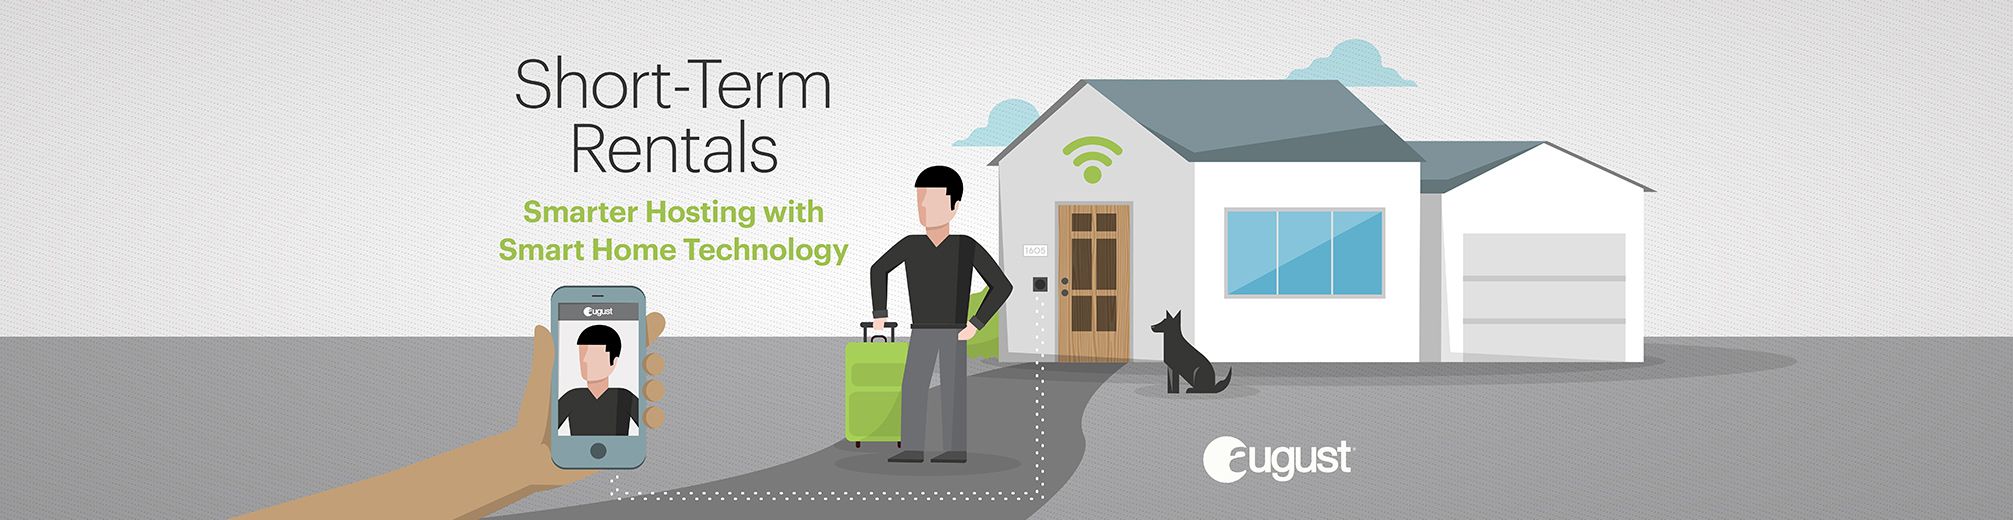 Research: Smarter Hosting With Smart Home Tech